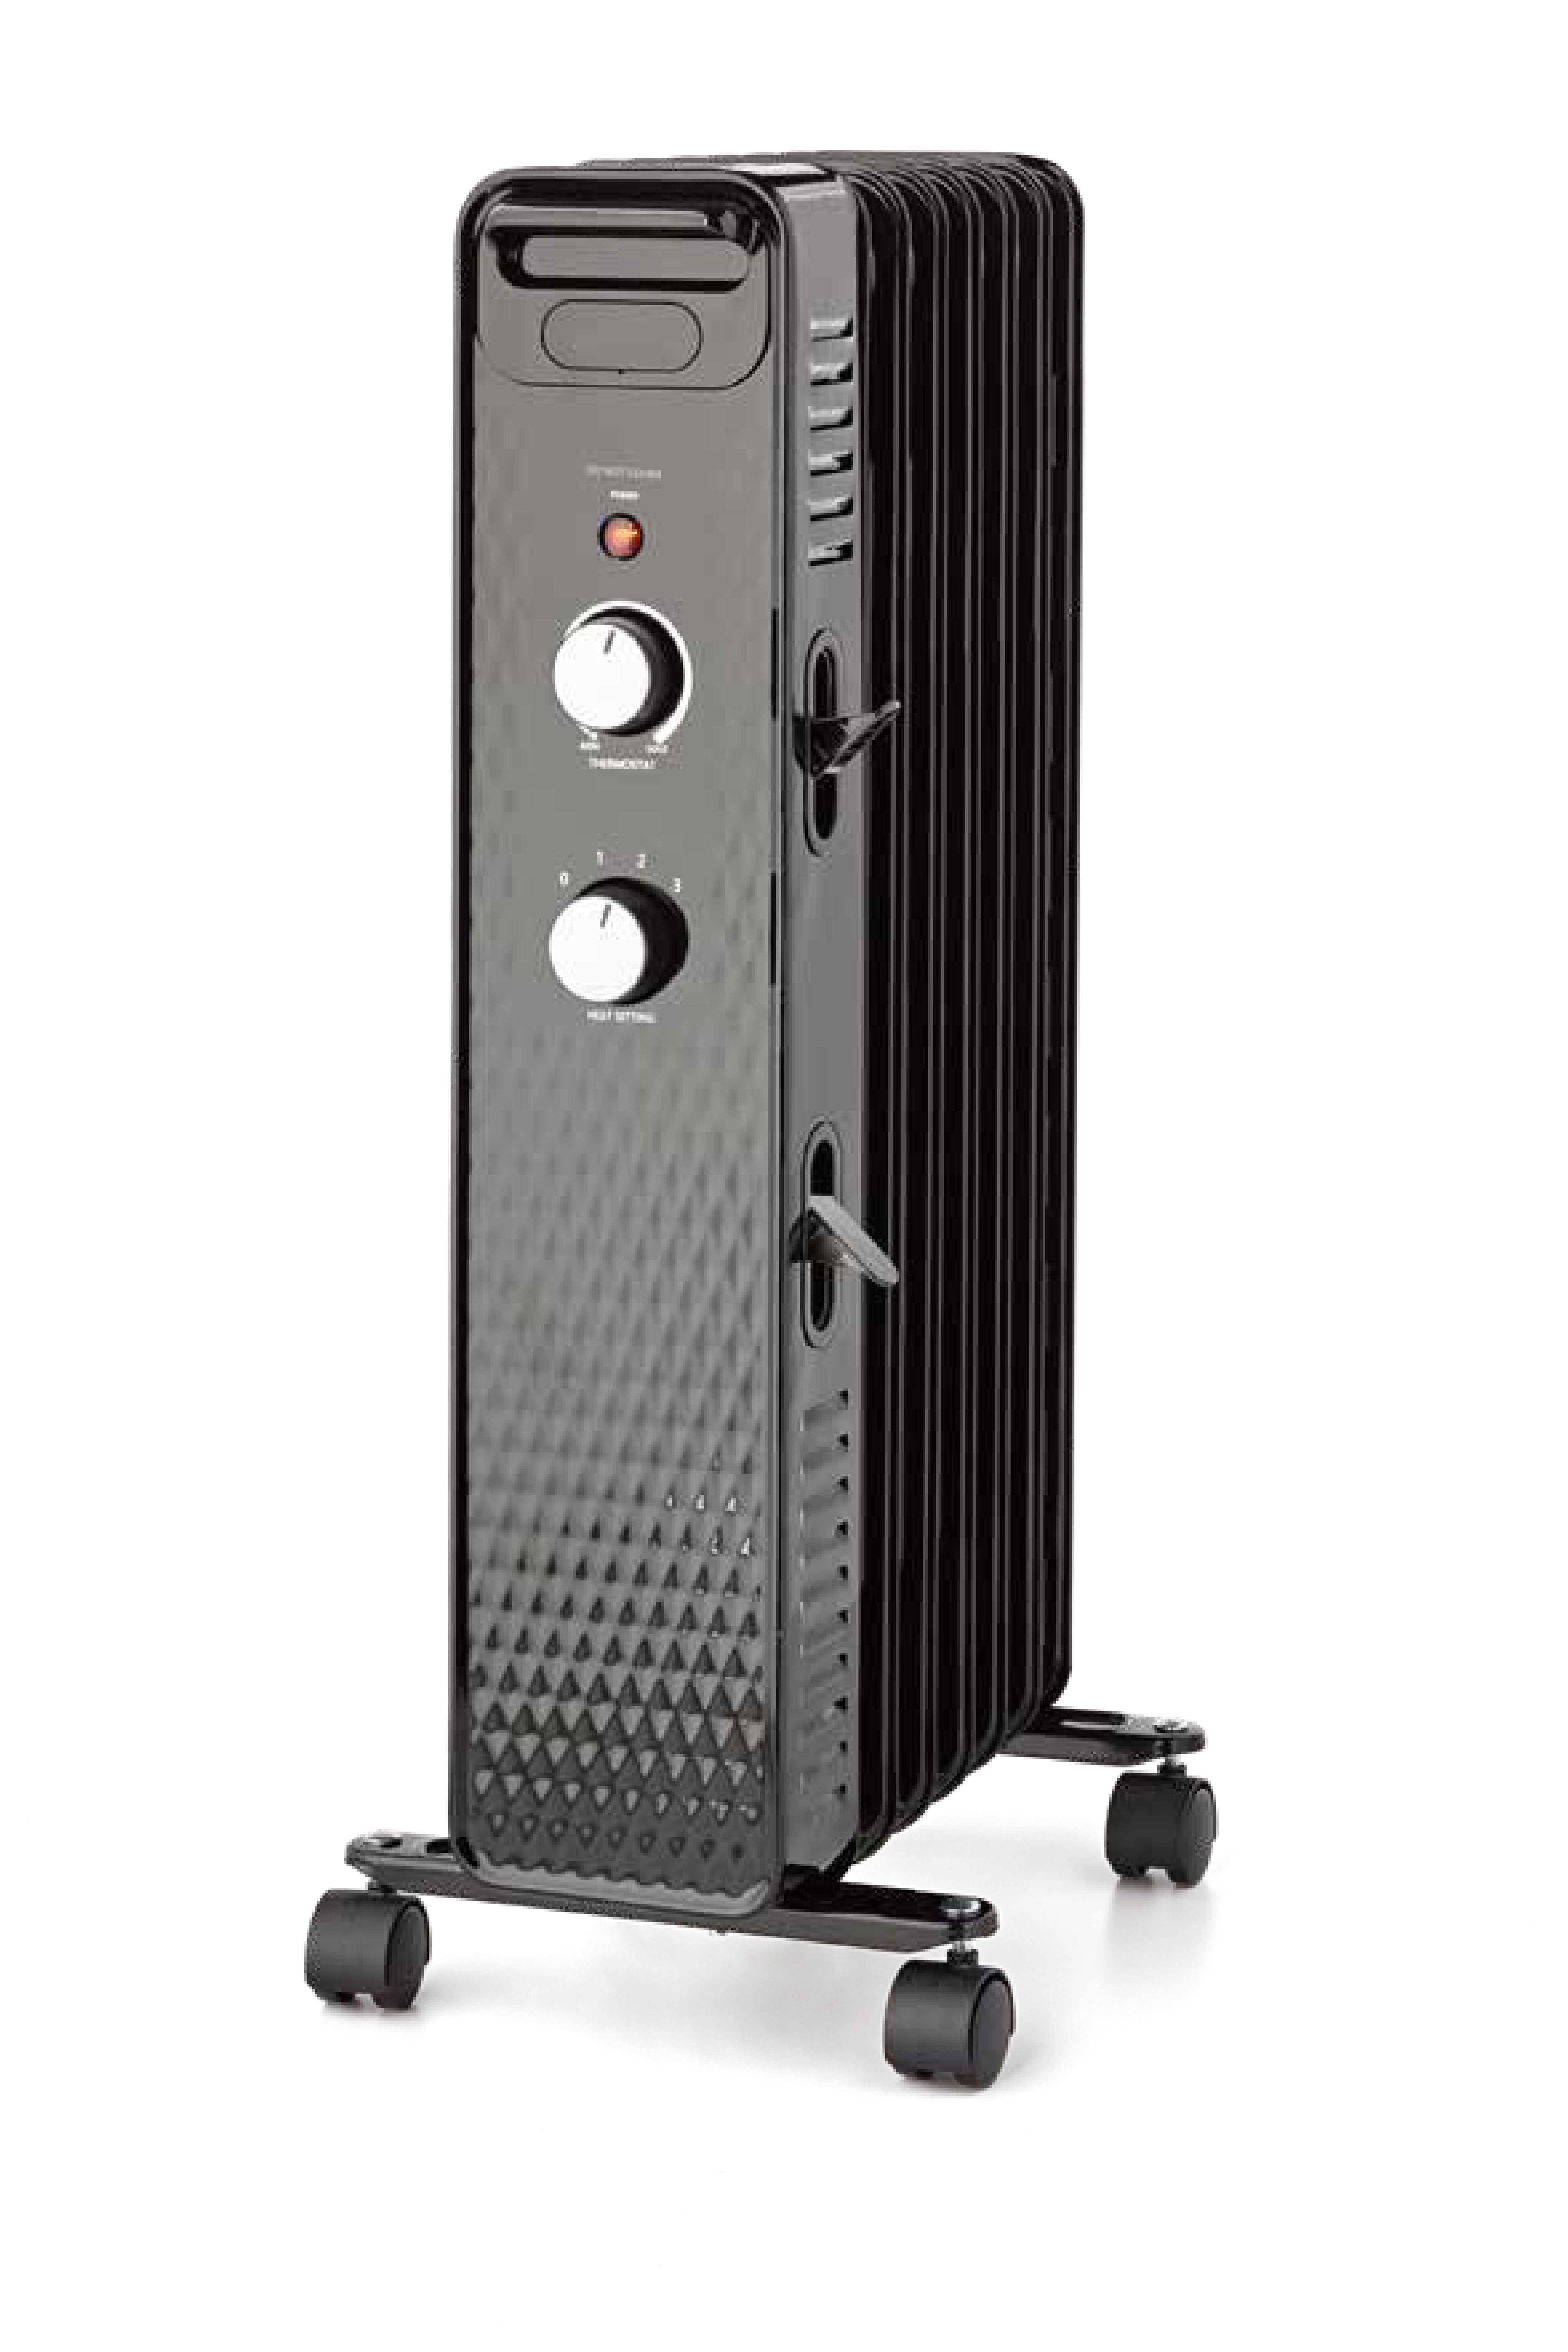 The Most Energy-Efficient Radiator Heater Covers